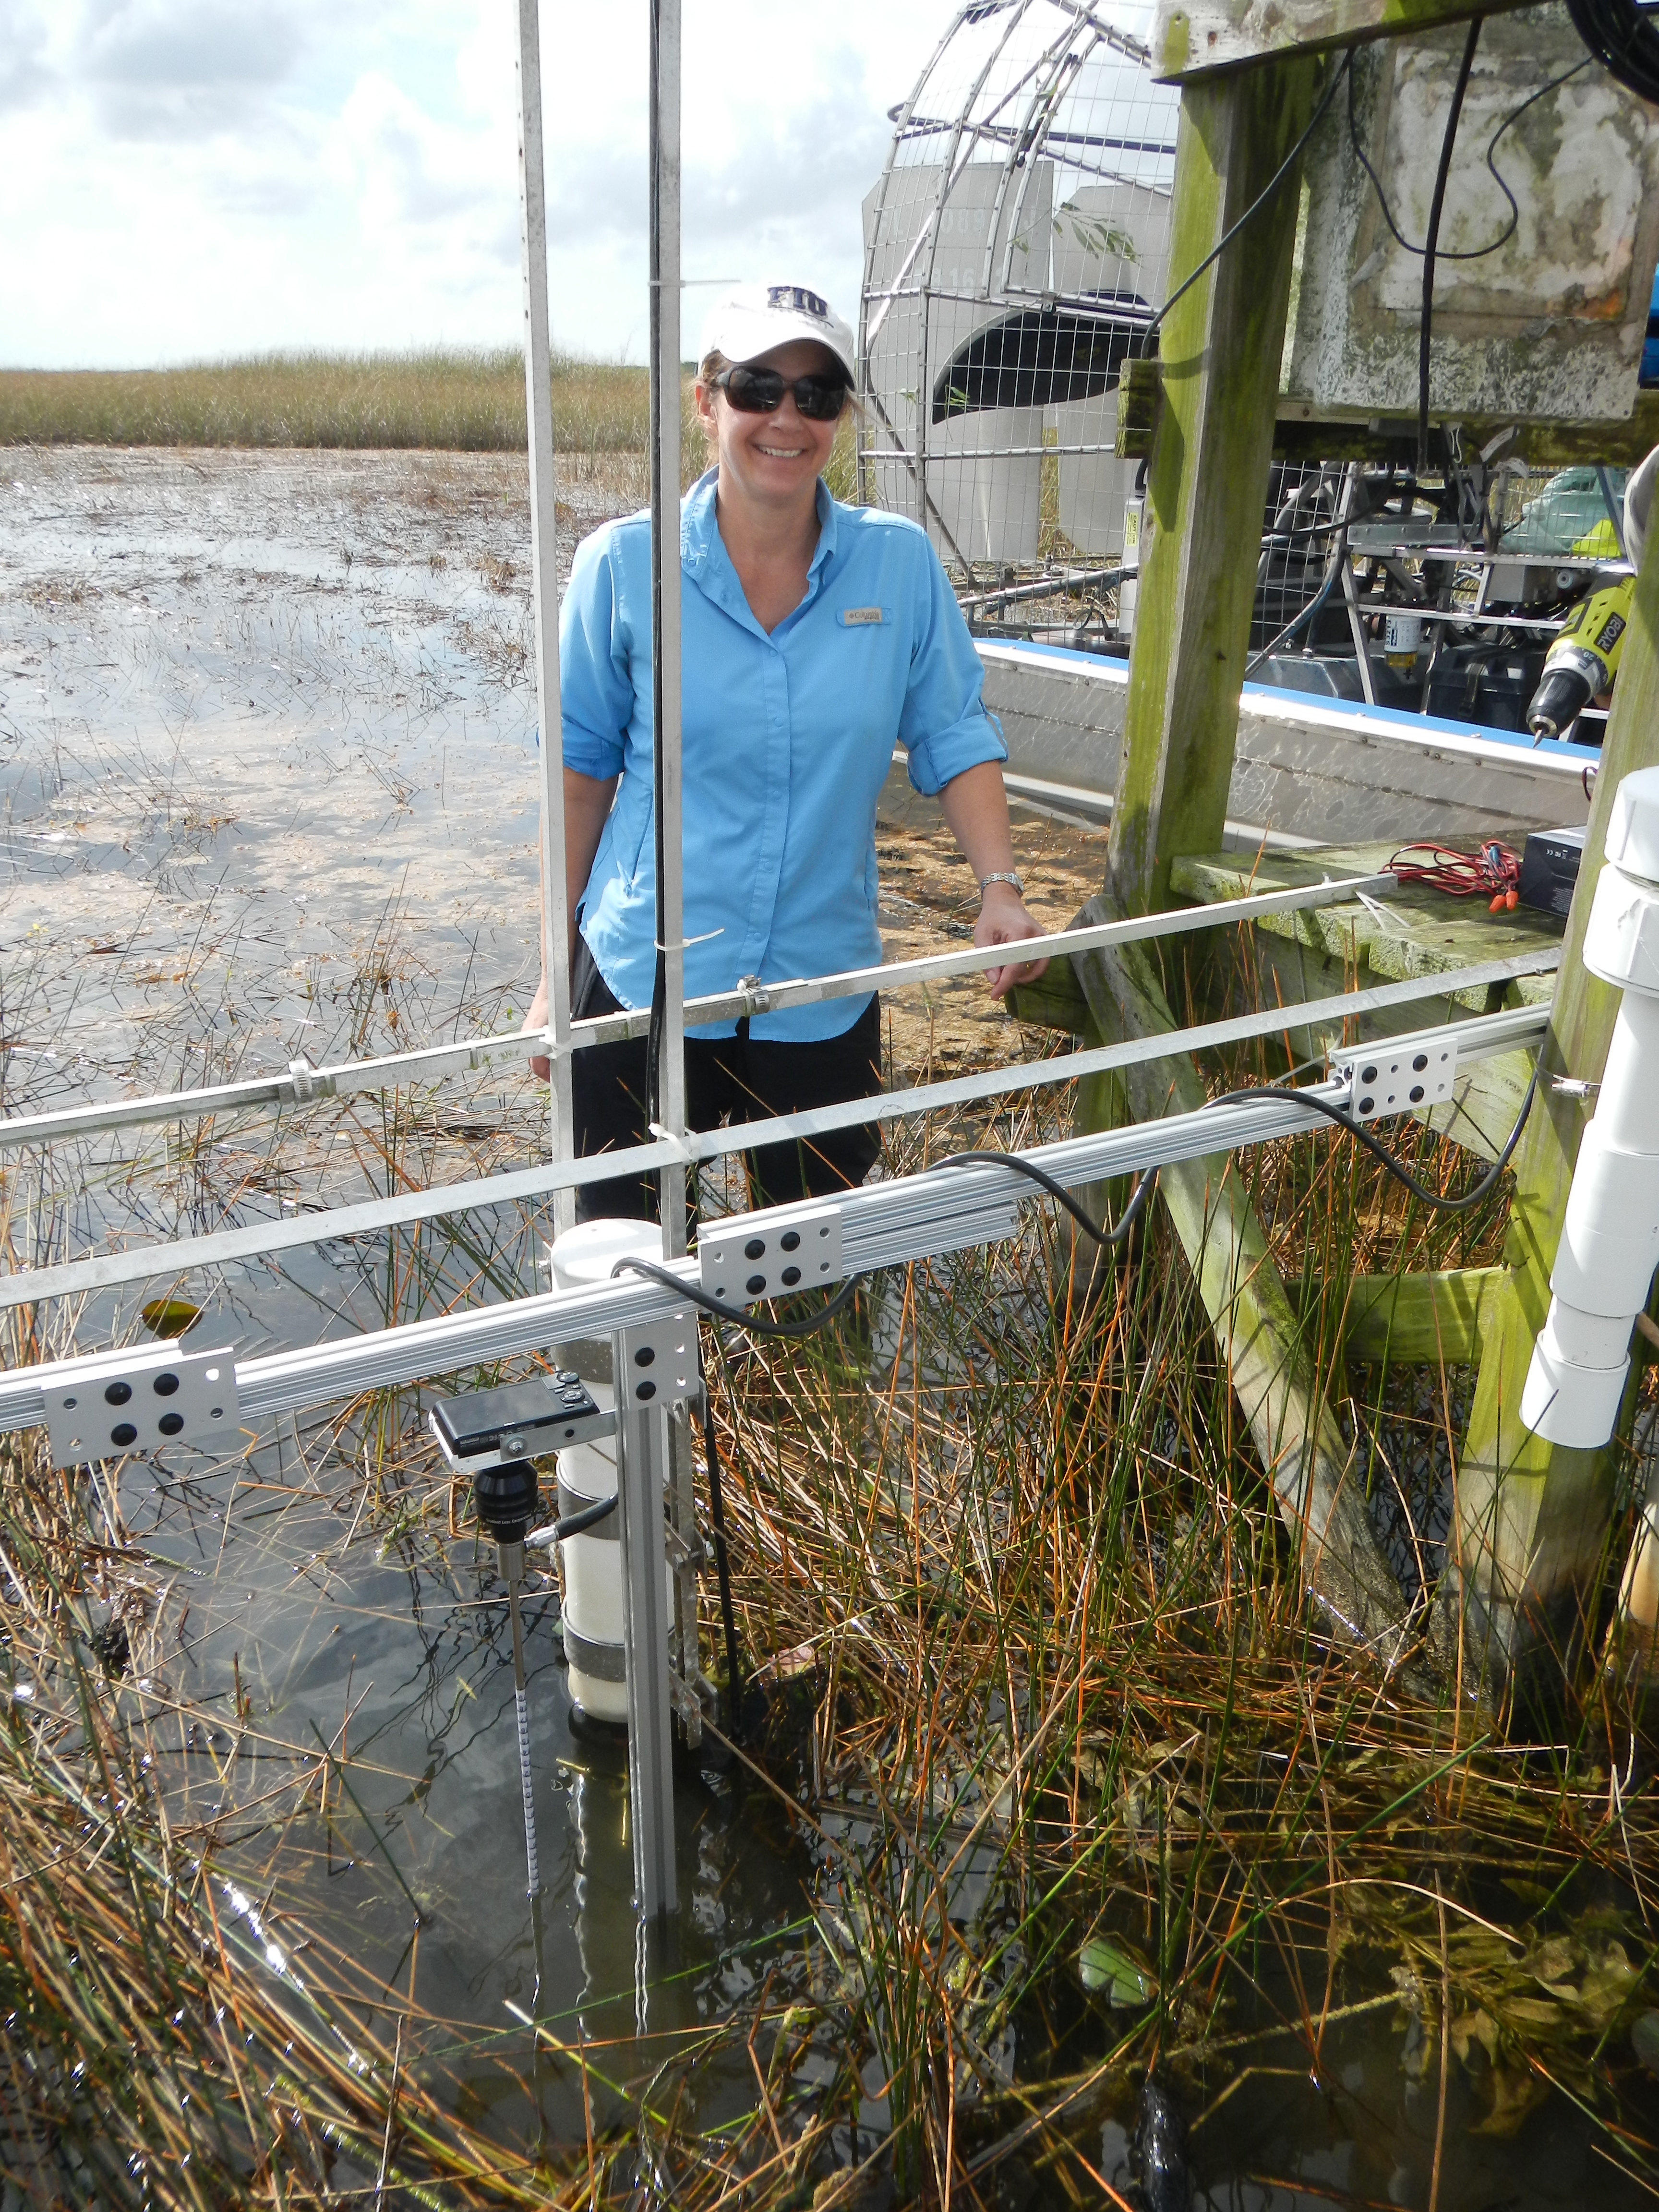 Dr. Price measuring surface water flow at SRS-1 in Shark River Slough